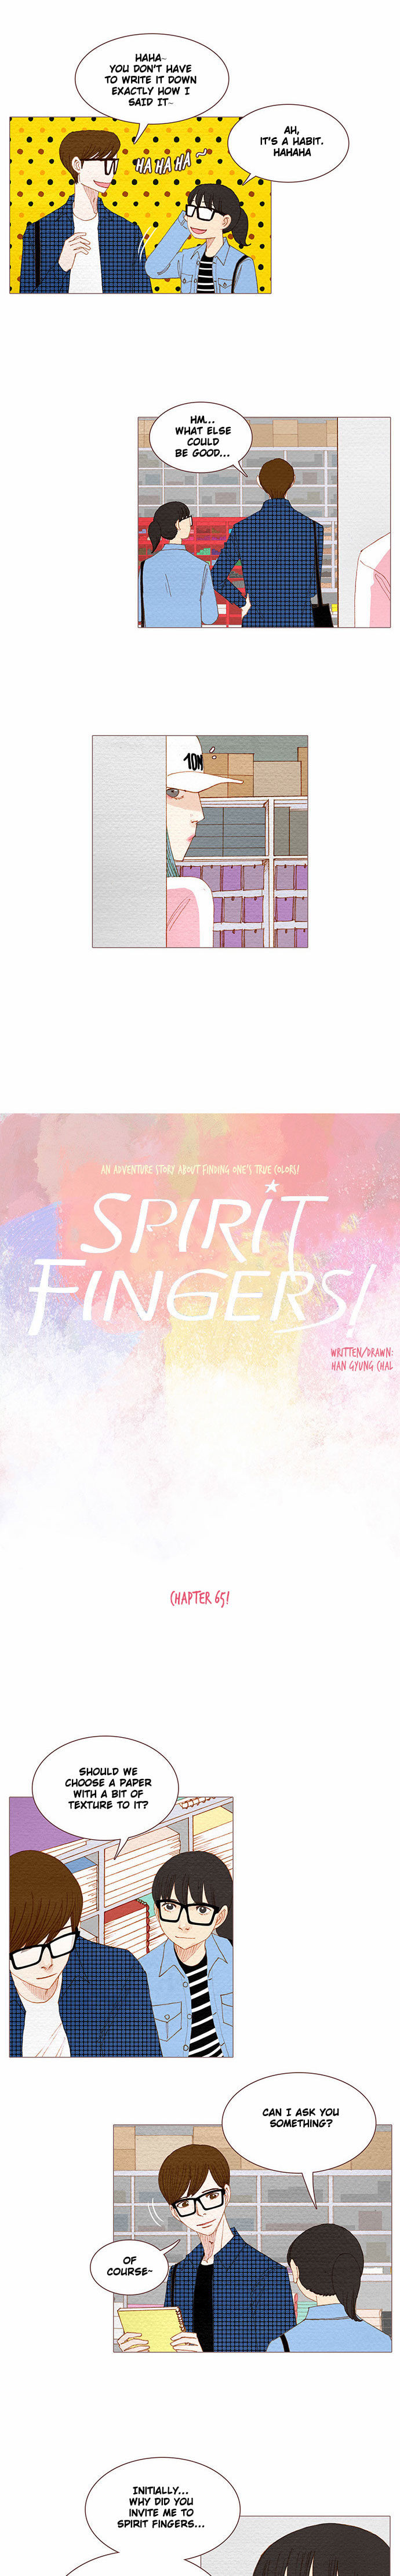 Spirit Fingers - Page 2